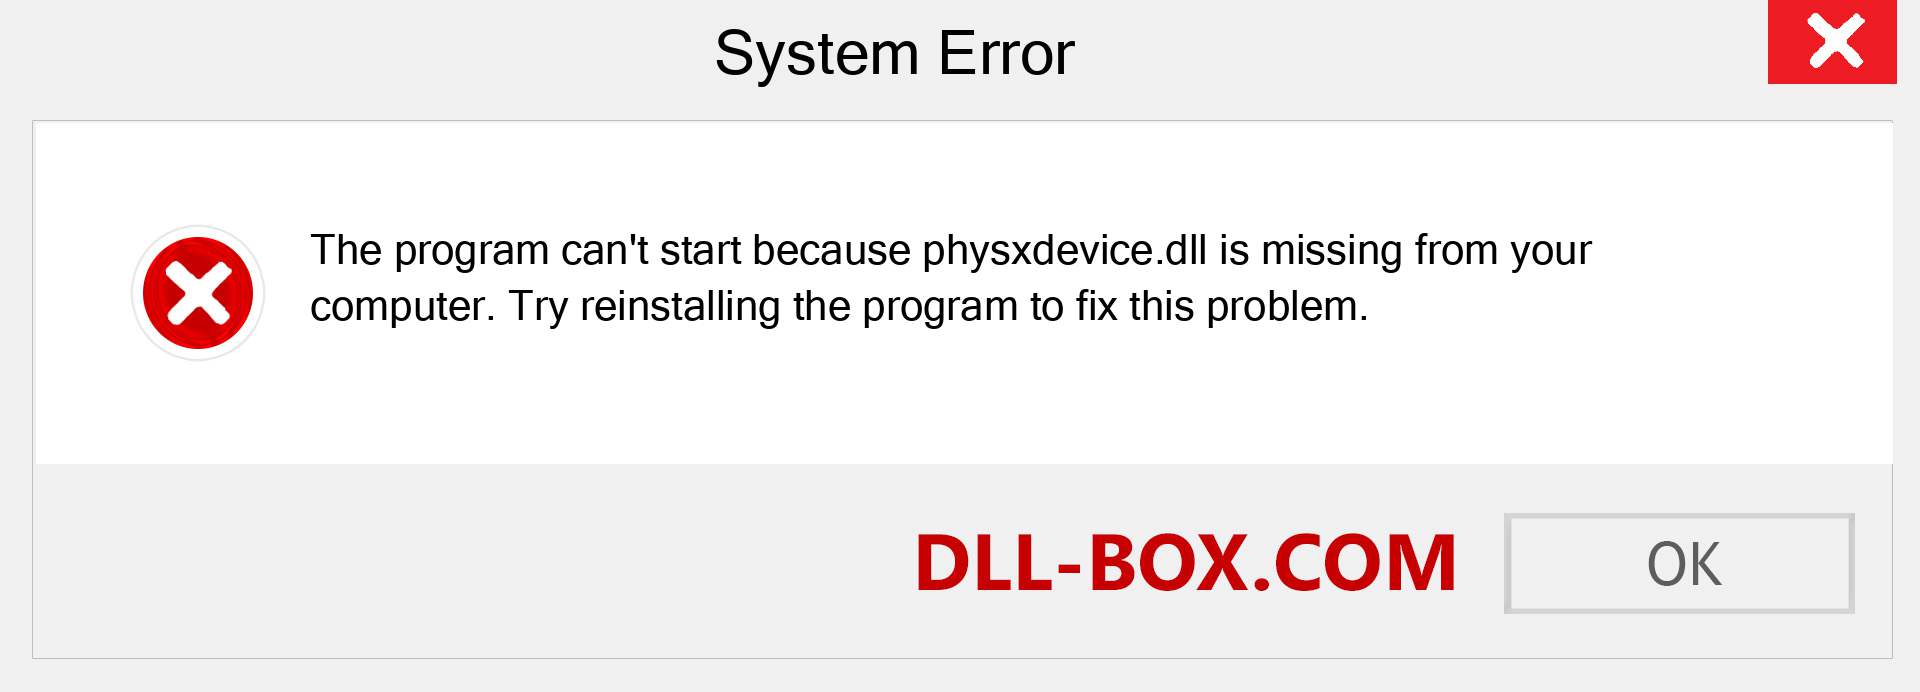  physxdevice.dll file is missing?. Download for Windows 7, 8, 10 - Fix  physxdevice dll Missing Error on Windows, photos, images